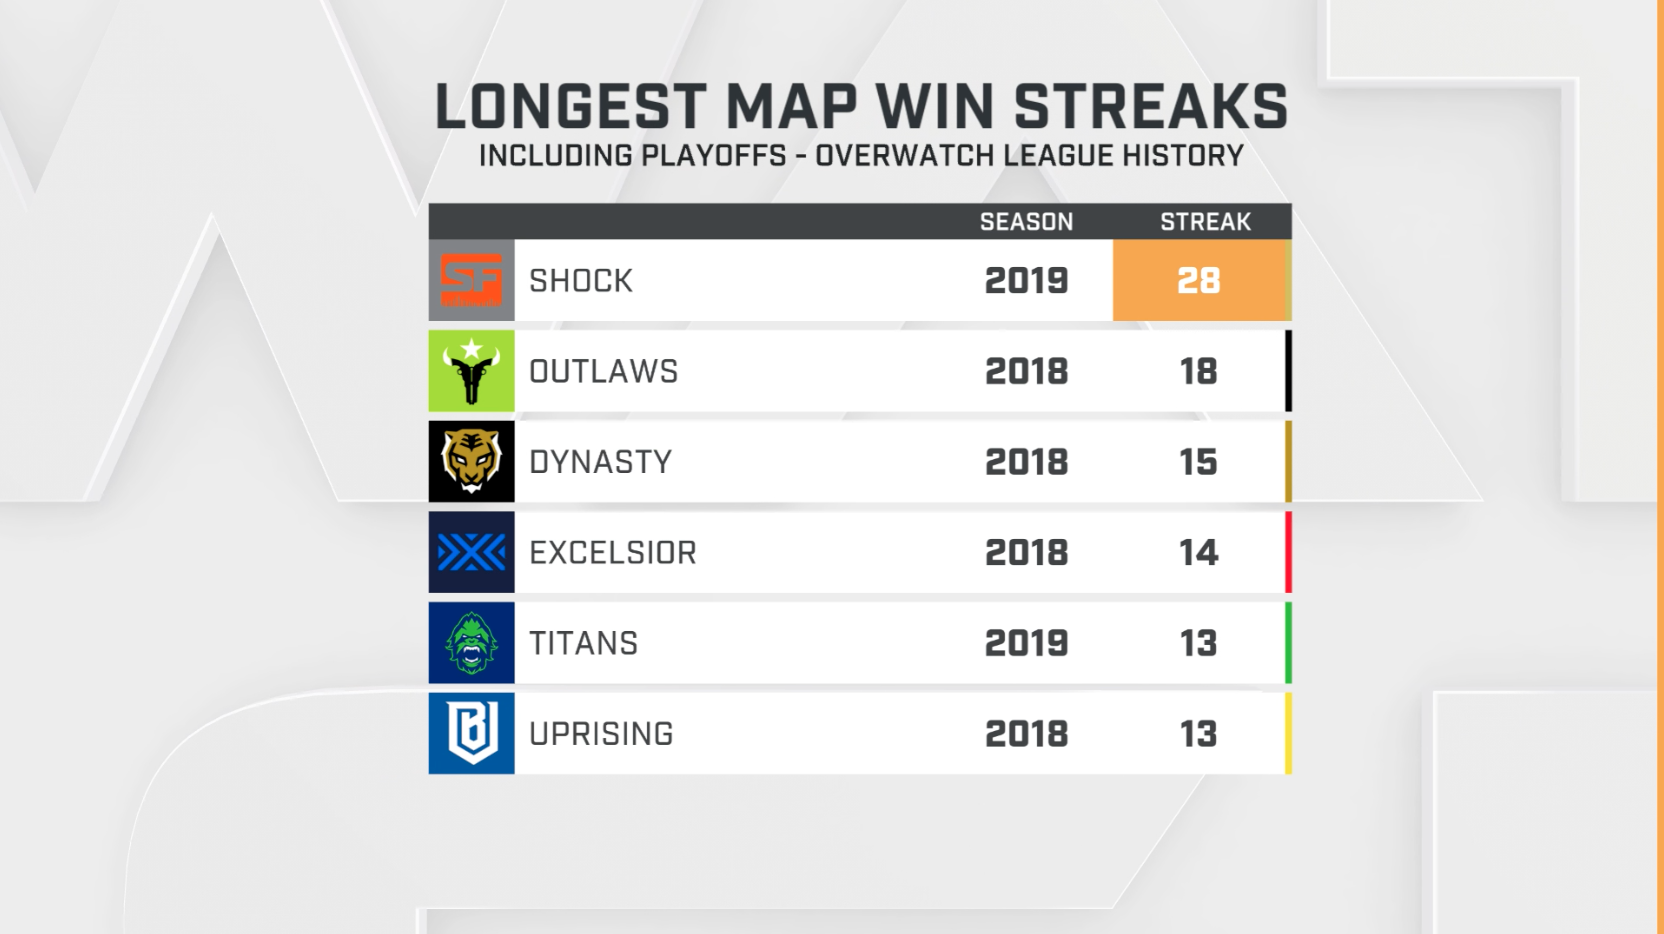 It seems unlikely that anyone will ever match the Shock's 28-map winning streak. 